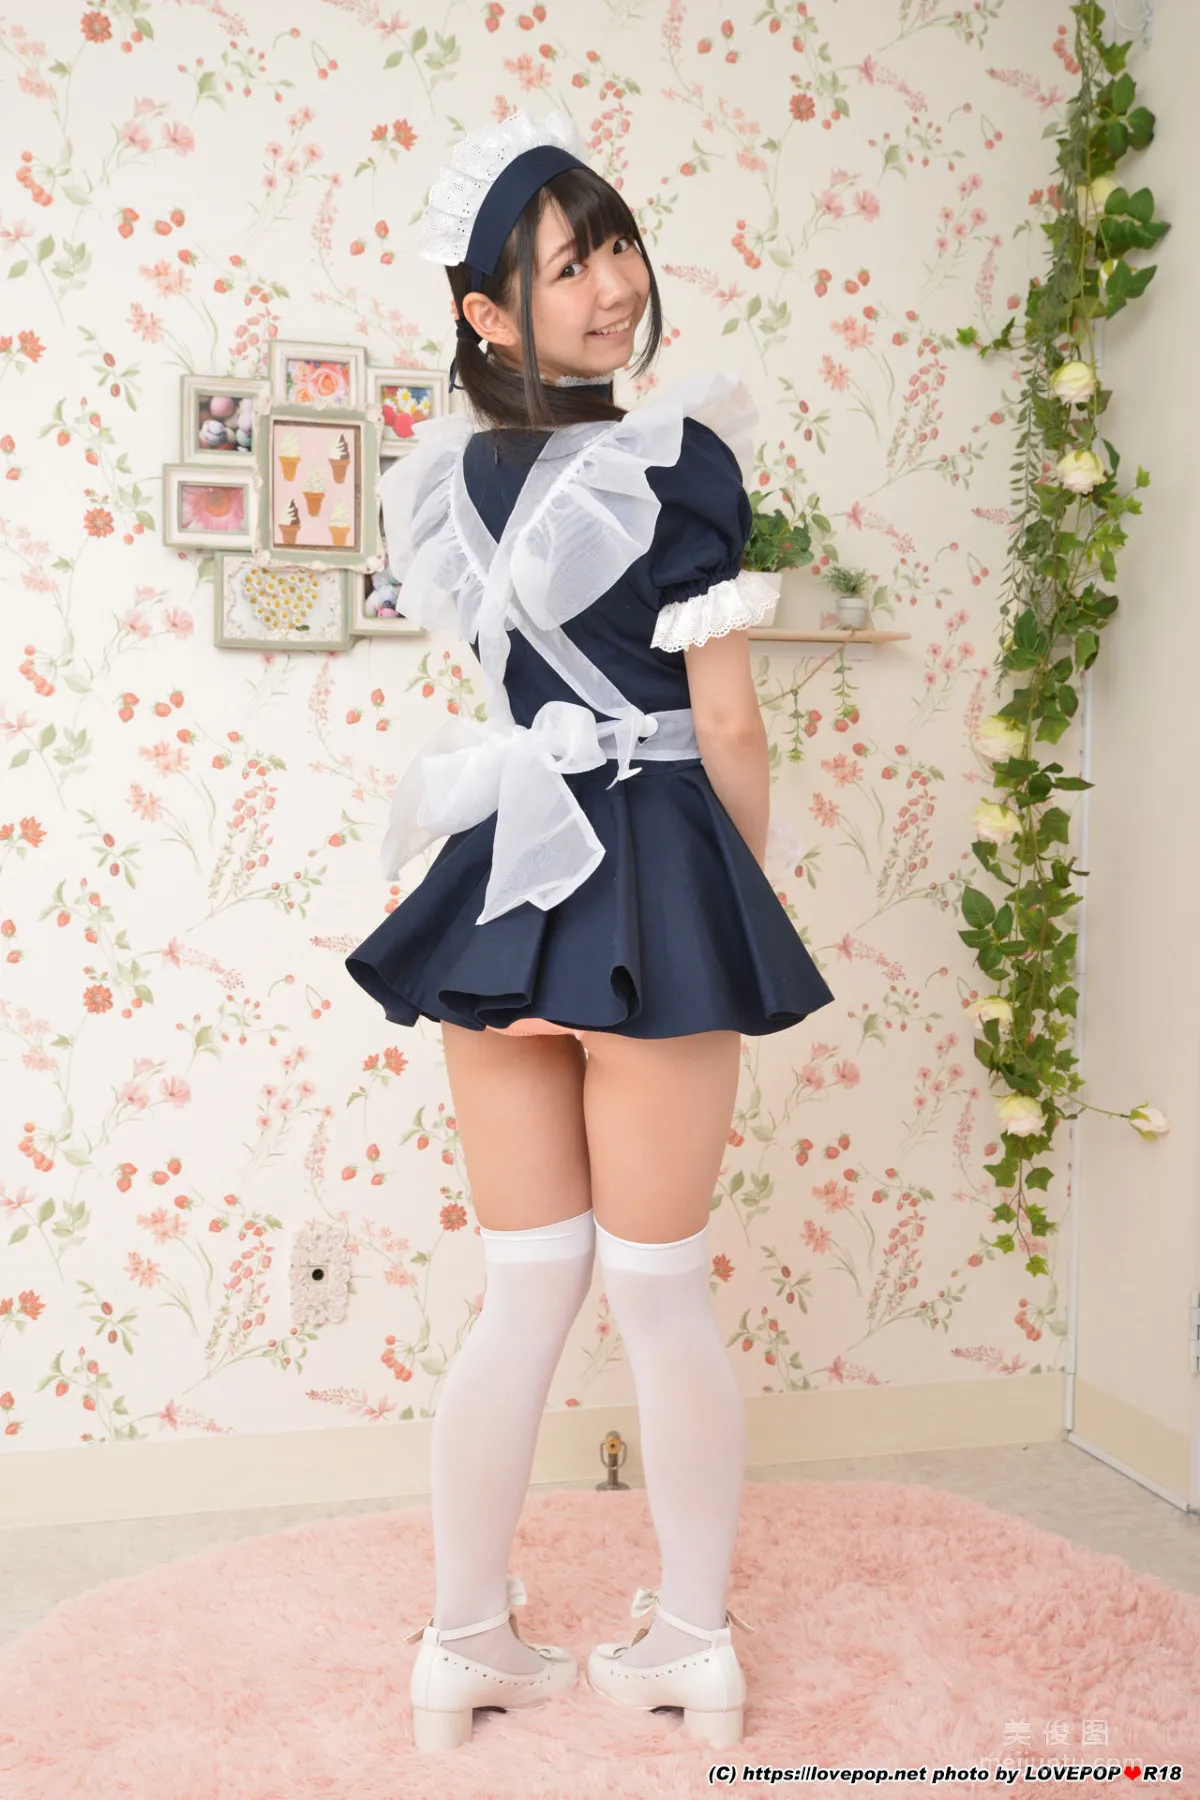 [LOVEPOP] Special Maid Collection - 白井ゆずか Photoset 0110